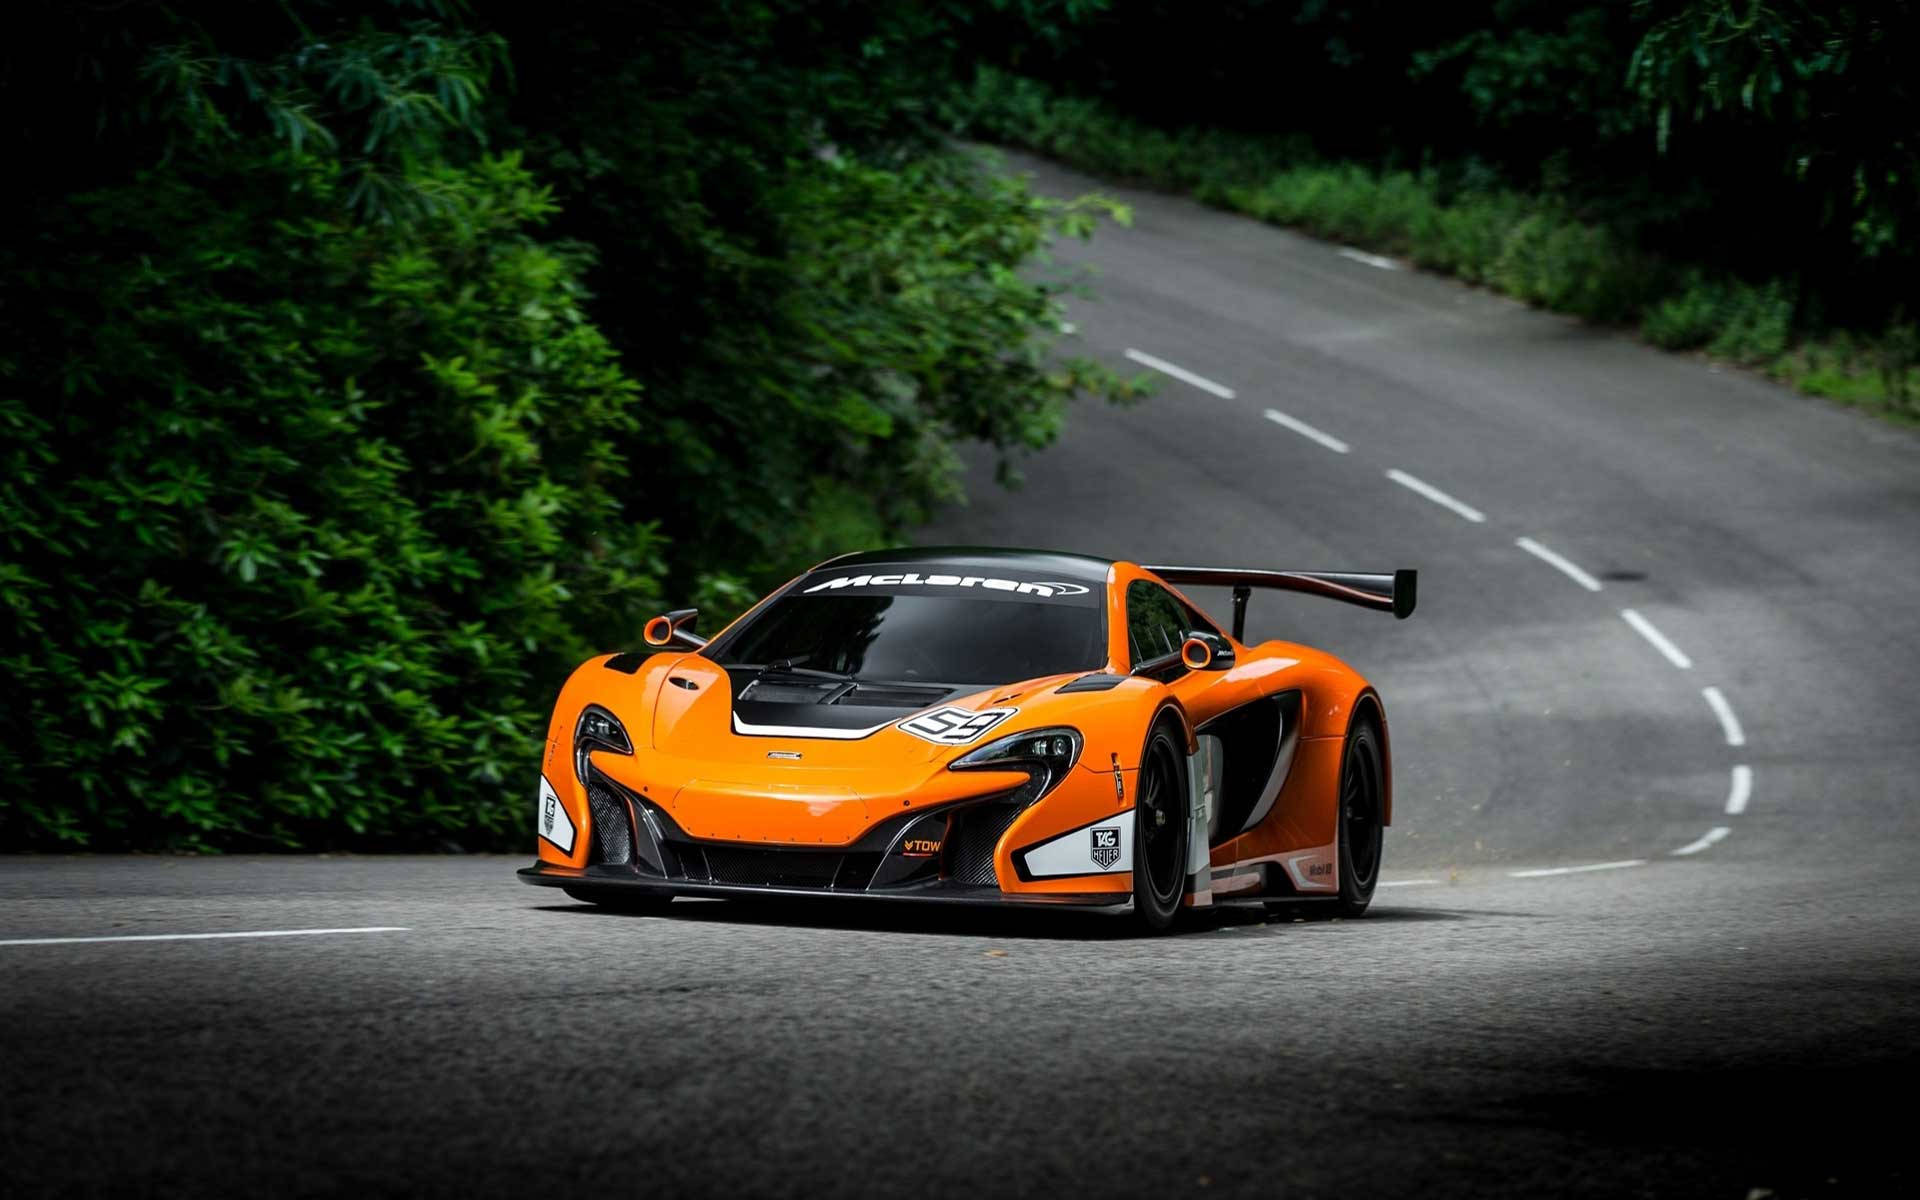 Dazzling Mclaren Gt3 - The Epitome Of Really Cool Cars Background